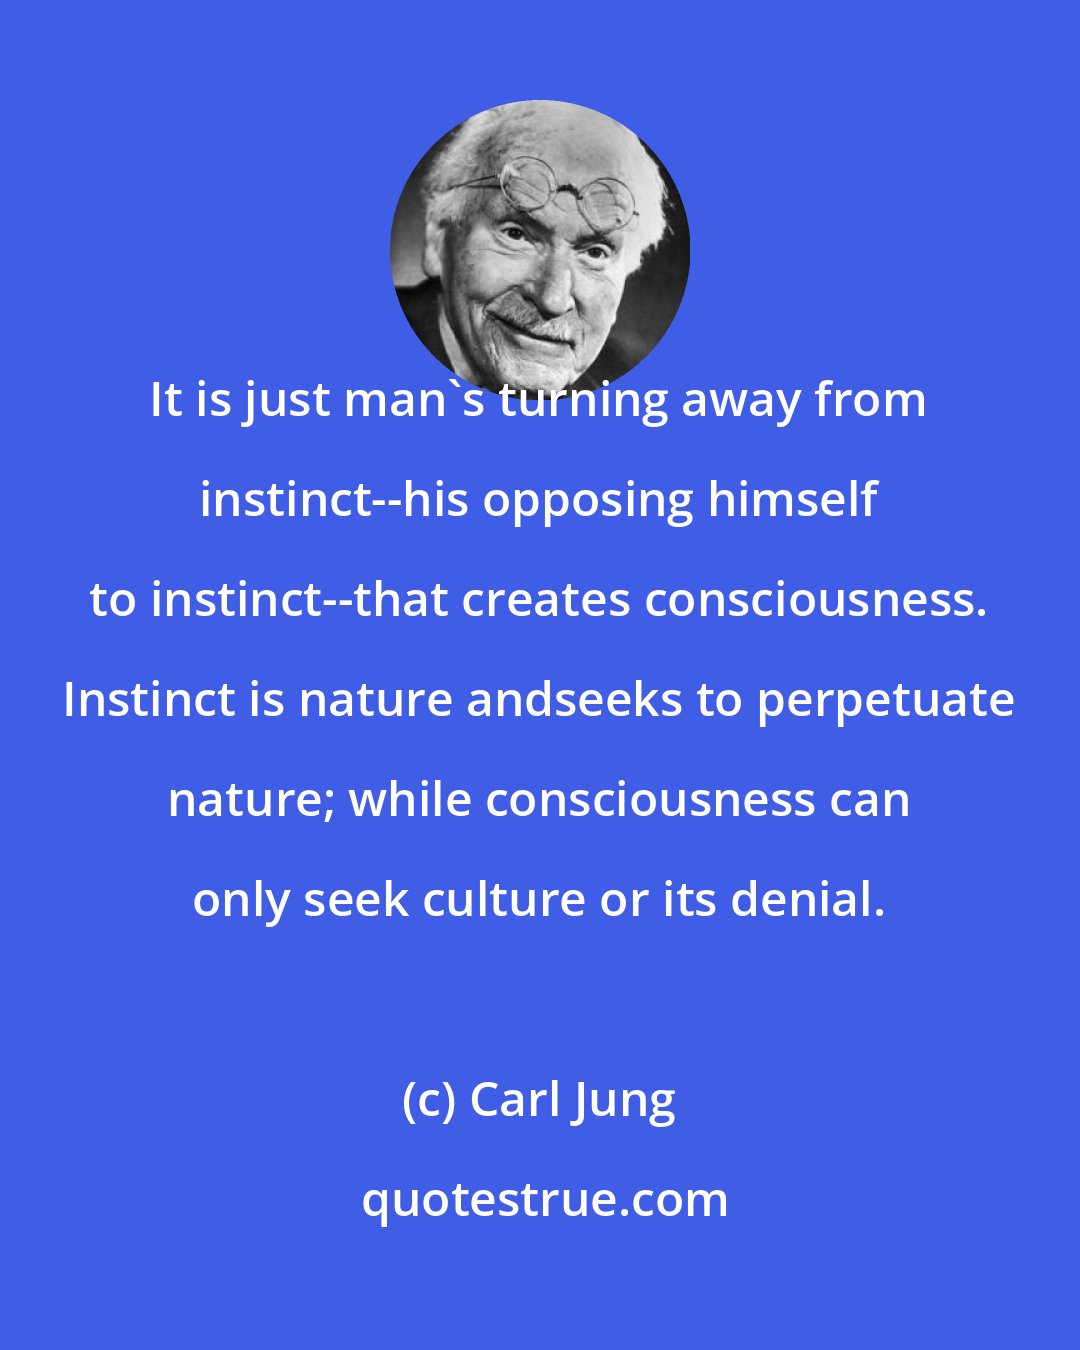 Carl Jung: It is just man's turning away from instinct--his opposing himself to instinct--that creates consciousness. Instinct is nature andseeks to perpetuate nature; while consciousness can only seek culture or its denial.